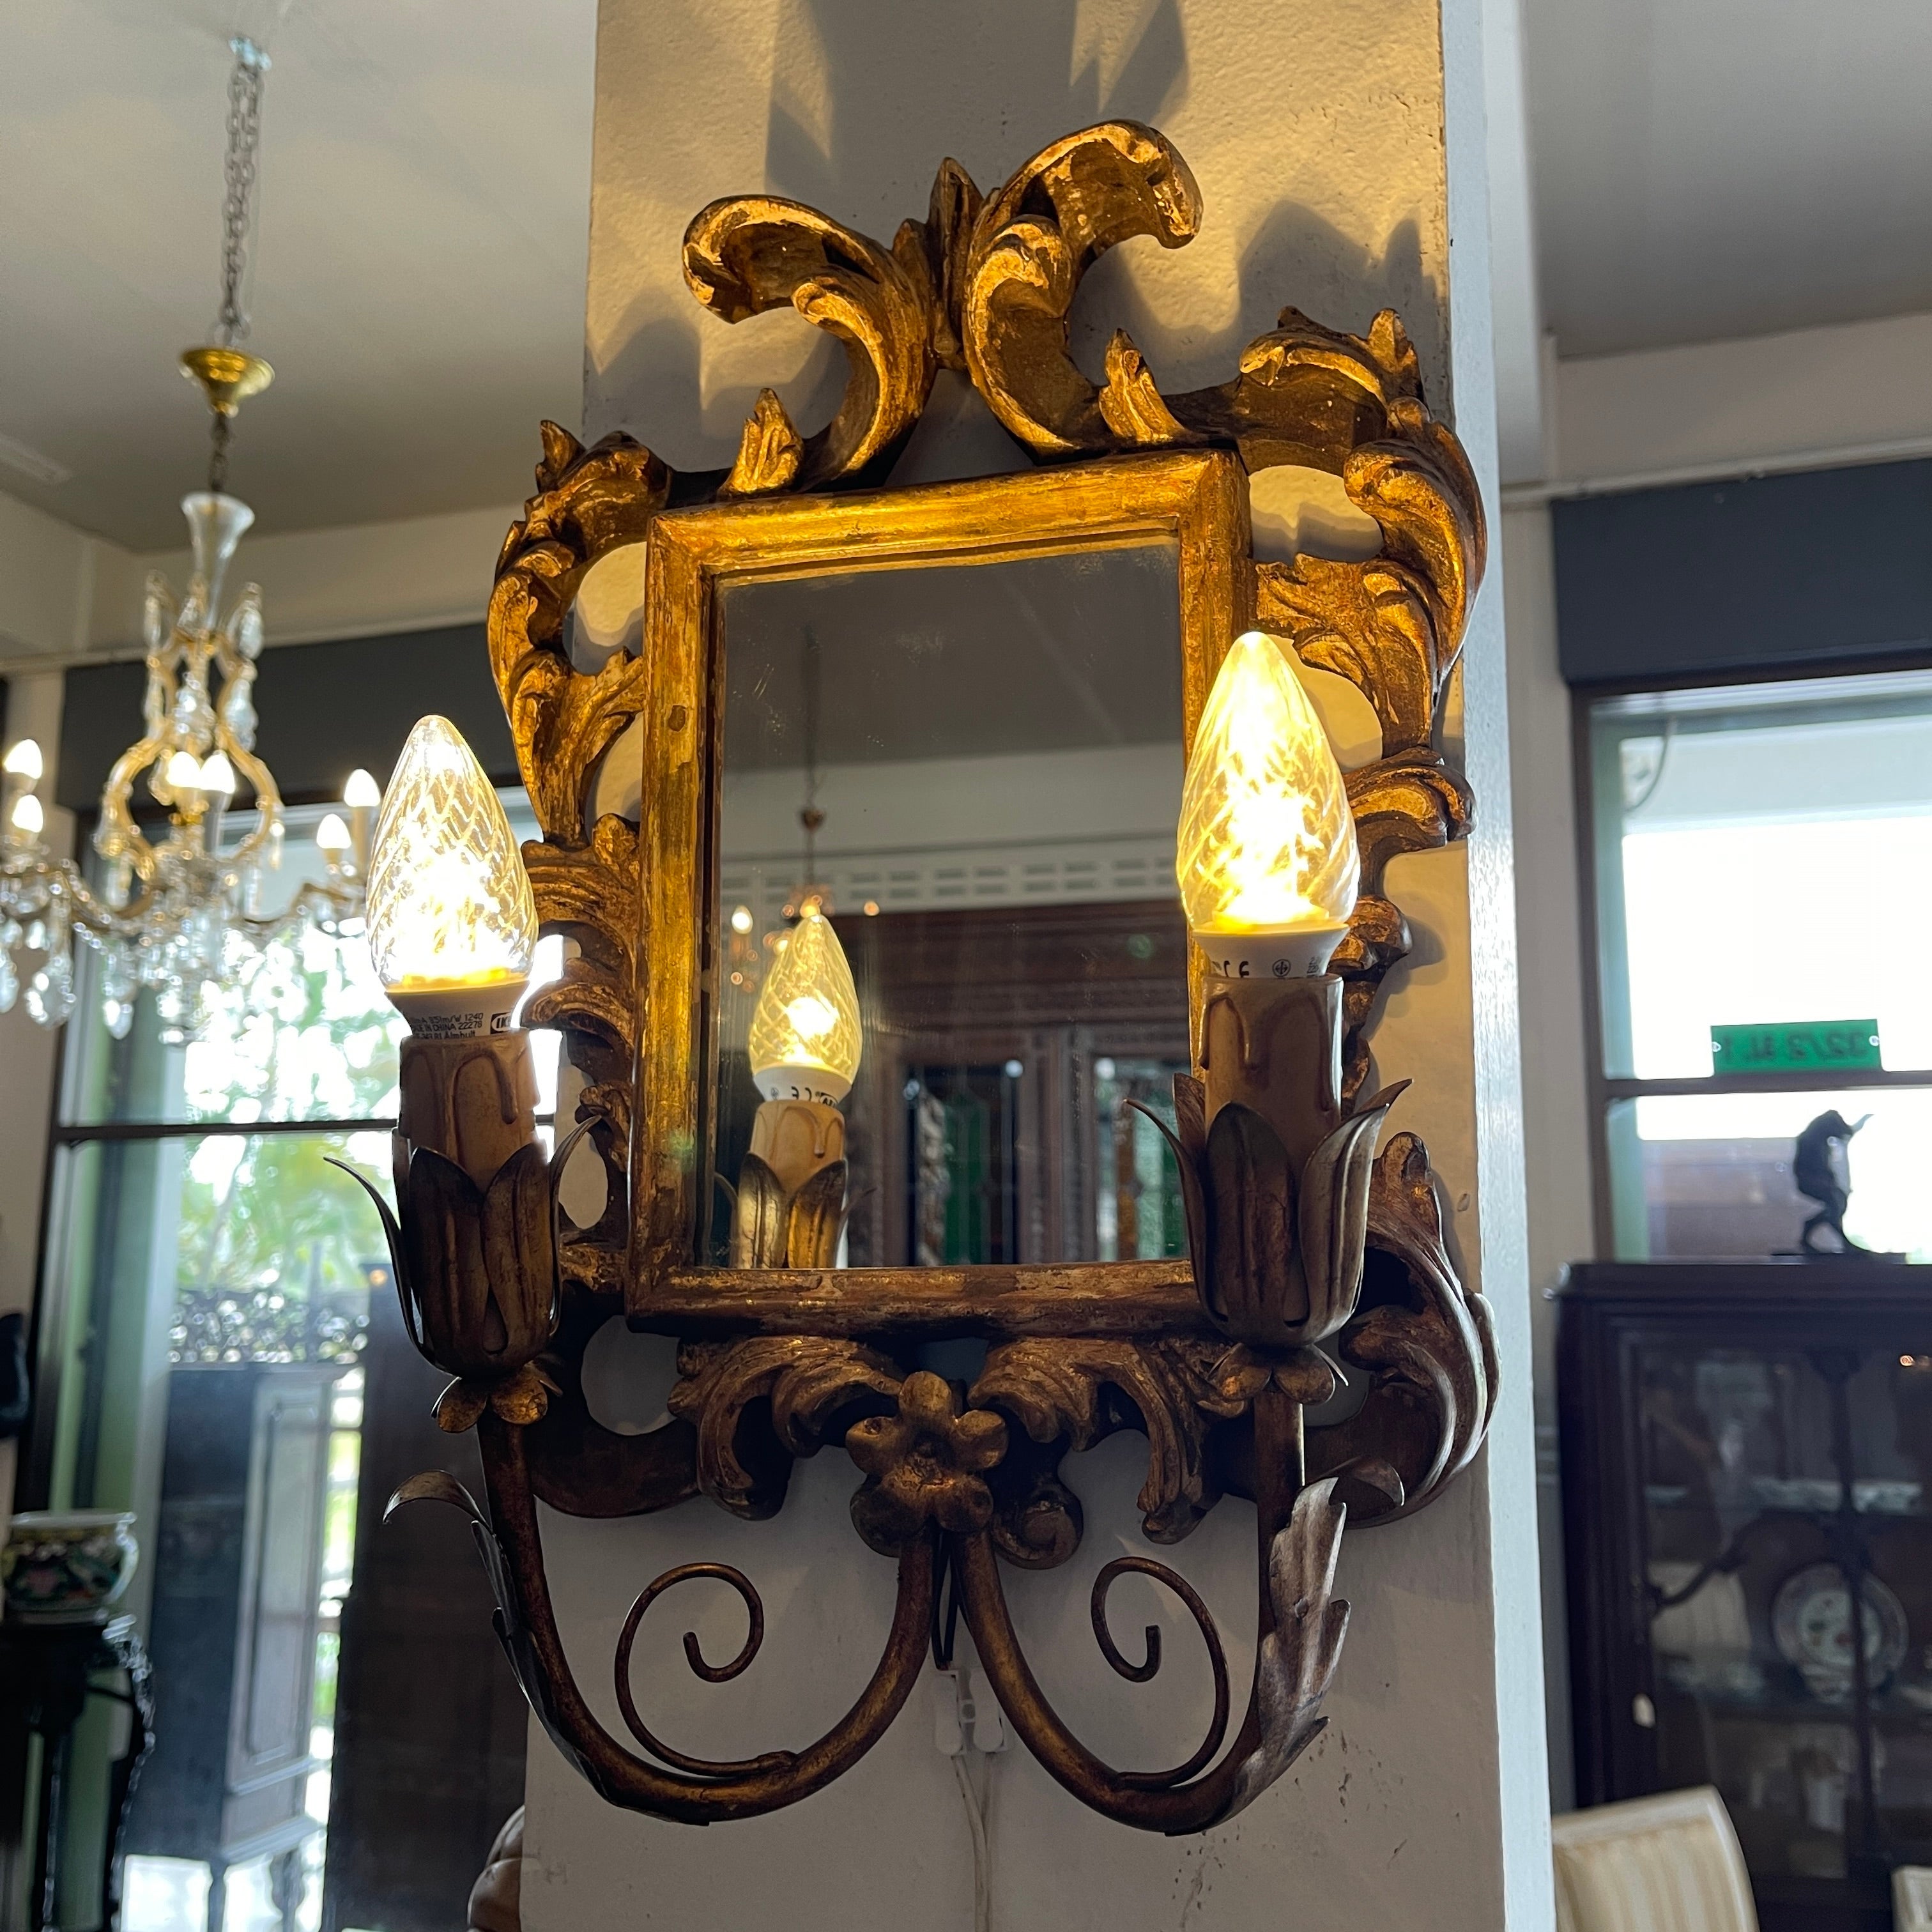 Presenting a stunning pair of 19th century Antique European giltwood carved mirror sconces. These exquisite sconces showcase the epitome of 19th-century craftsmanship, featuring intricately carved giltwood frames adorned with ornate motifs and